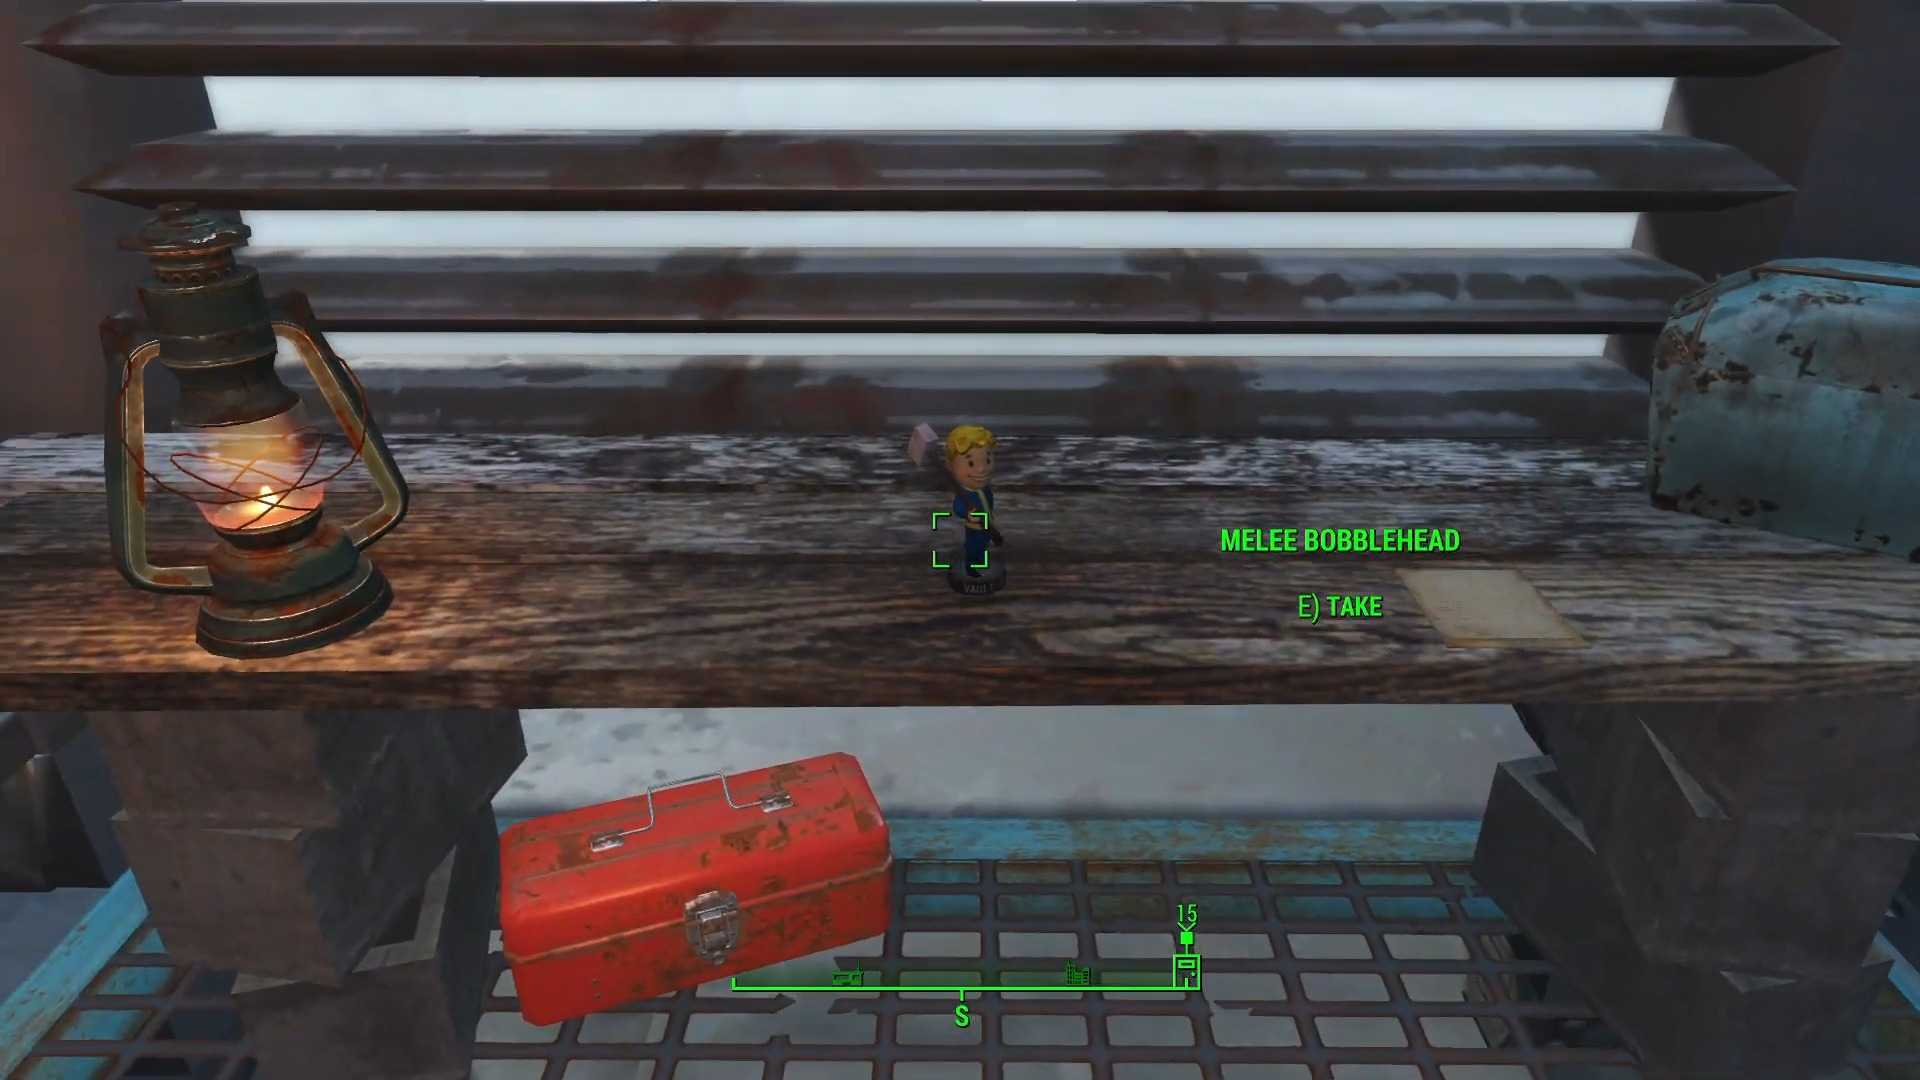 The Melee Bobblehead in Fallout 4